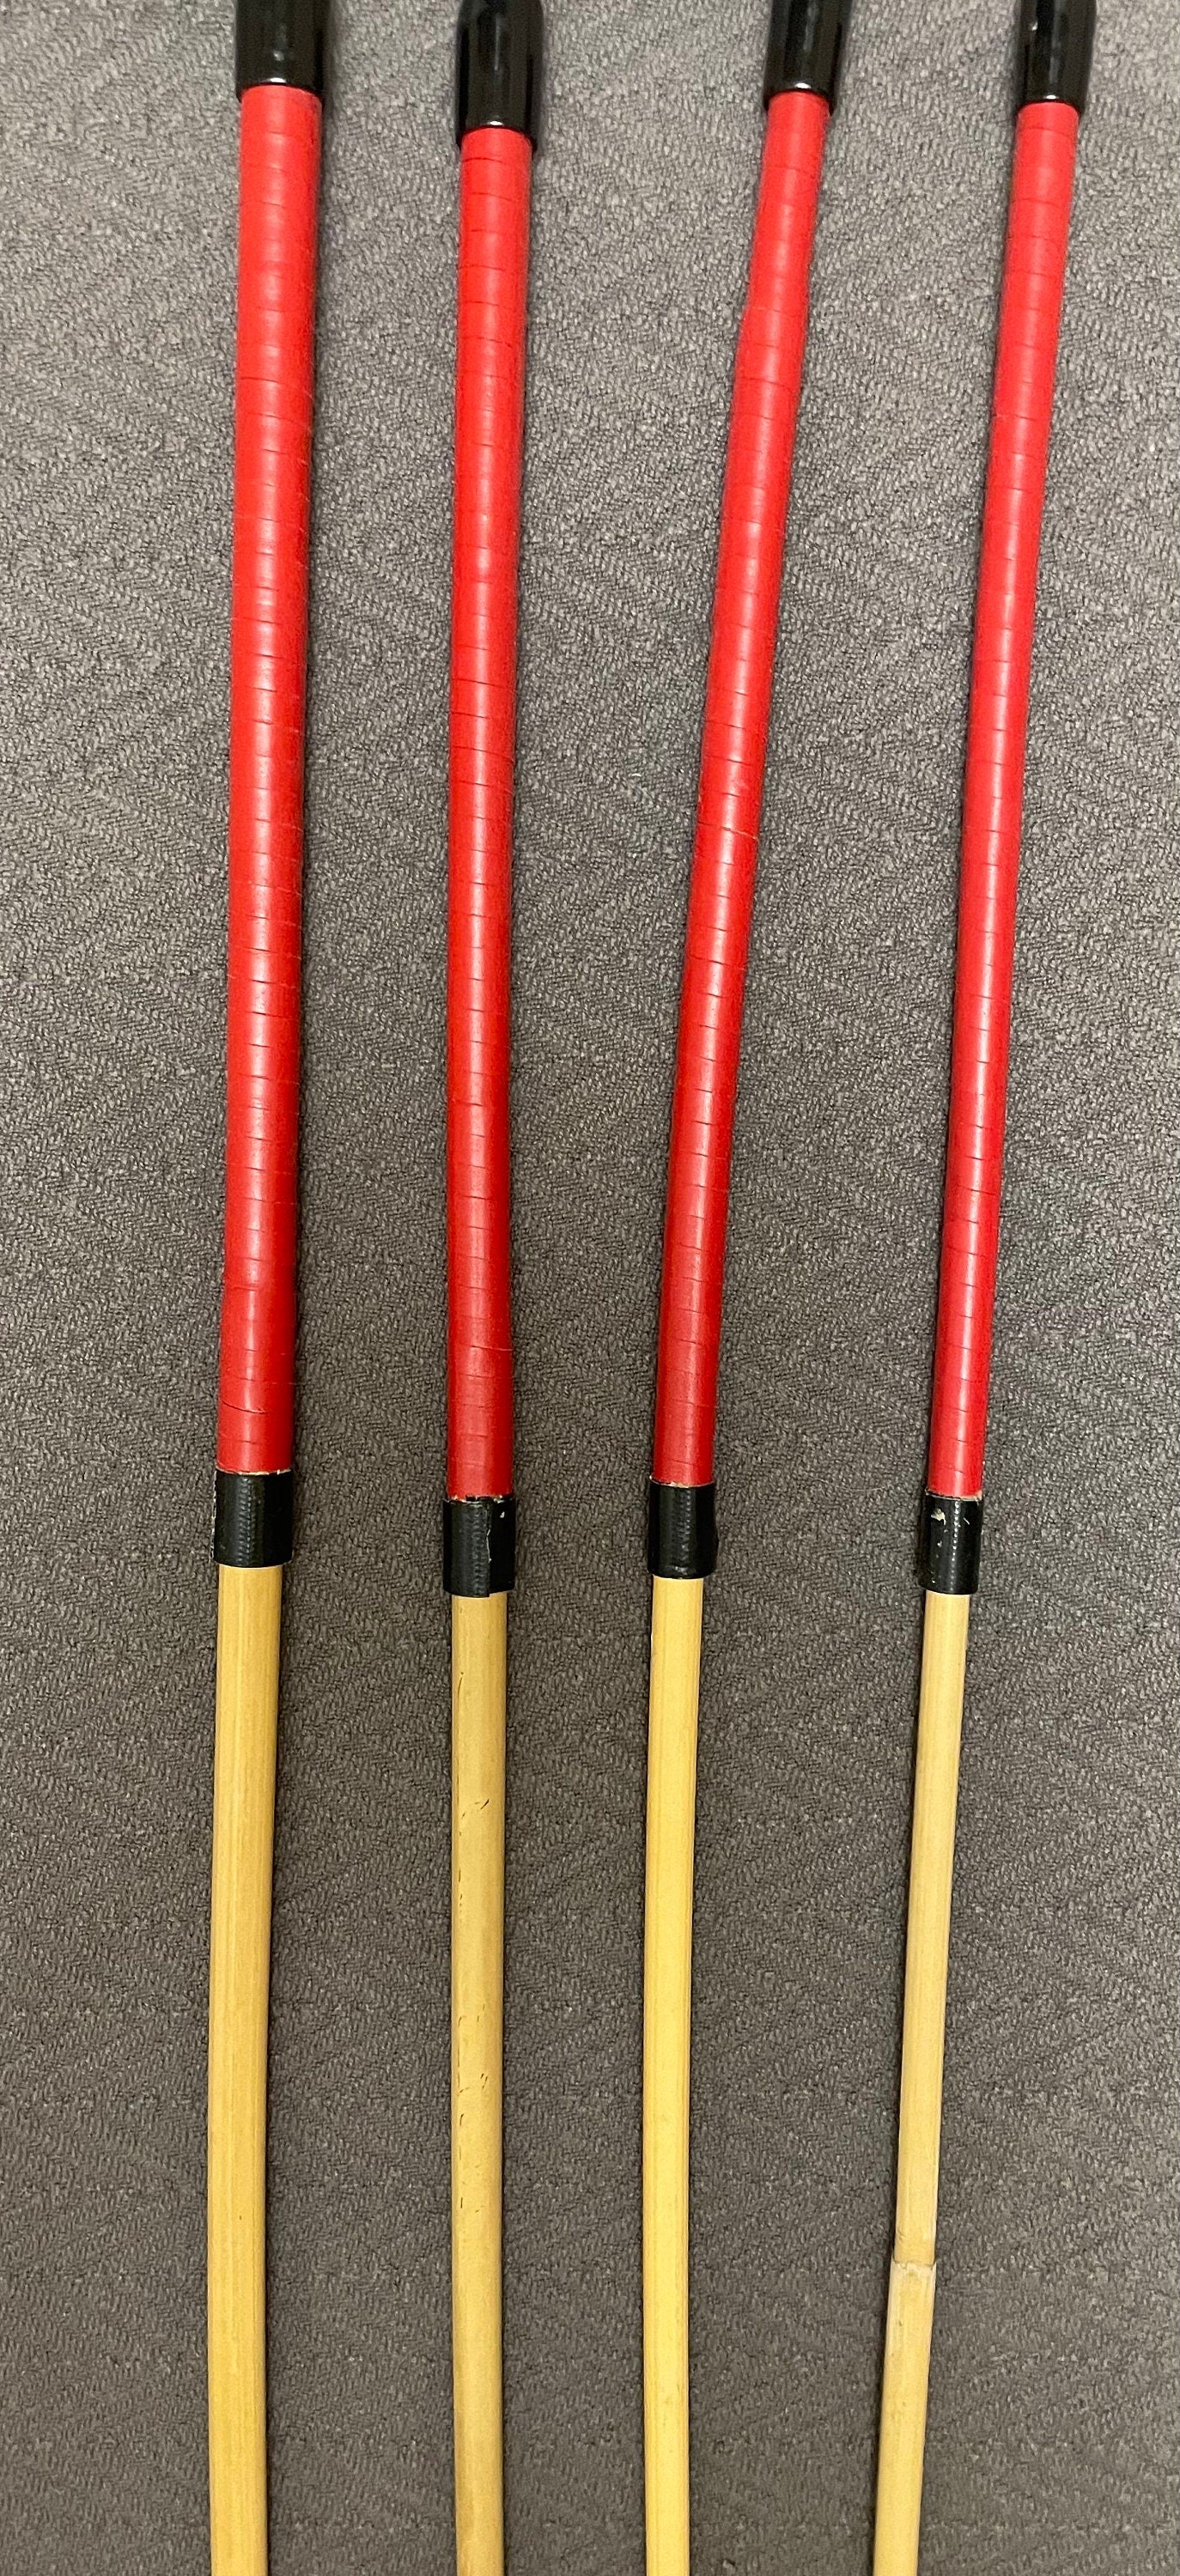 Professional Punitrix Extra Length Classic Dragon Rattan Whipping Canes - 100 to 110 cms Length - Red Kangaroo Leather Handles